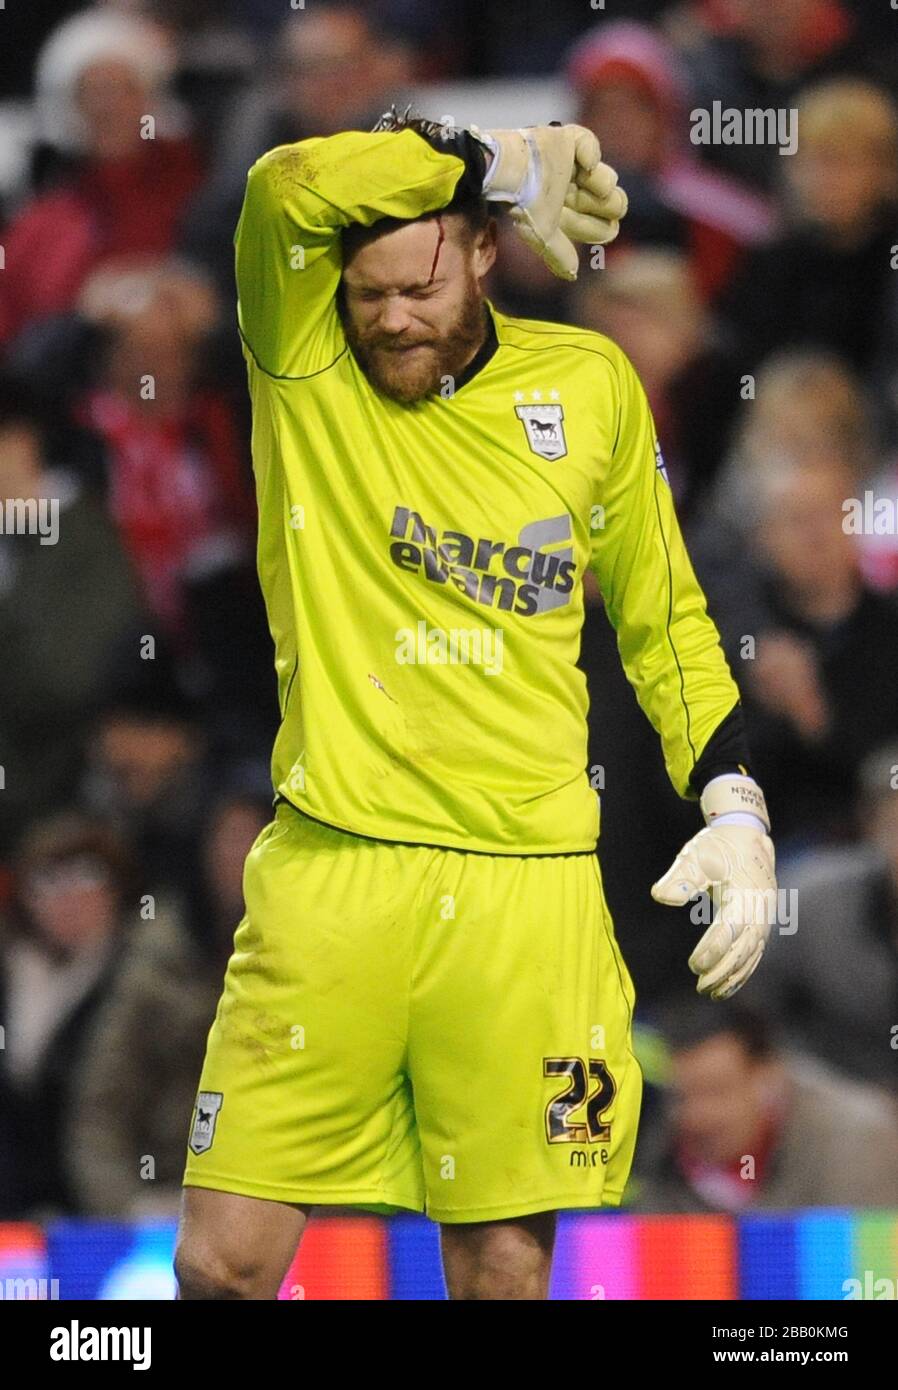 Ipswich Town goalkeeper Dean Gerken with a cut to his head after making a save to deny Nottingham Forest's Simon Cox Stock Photo